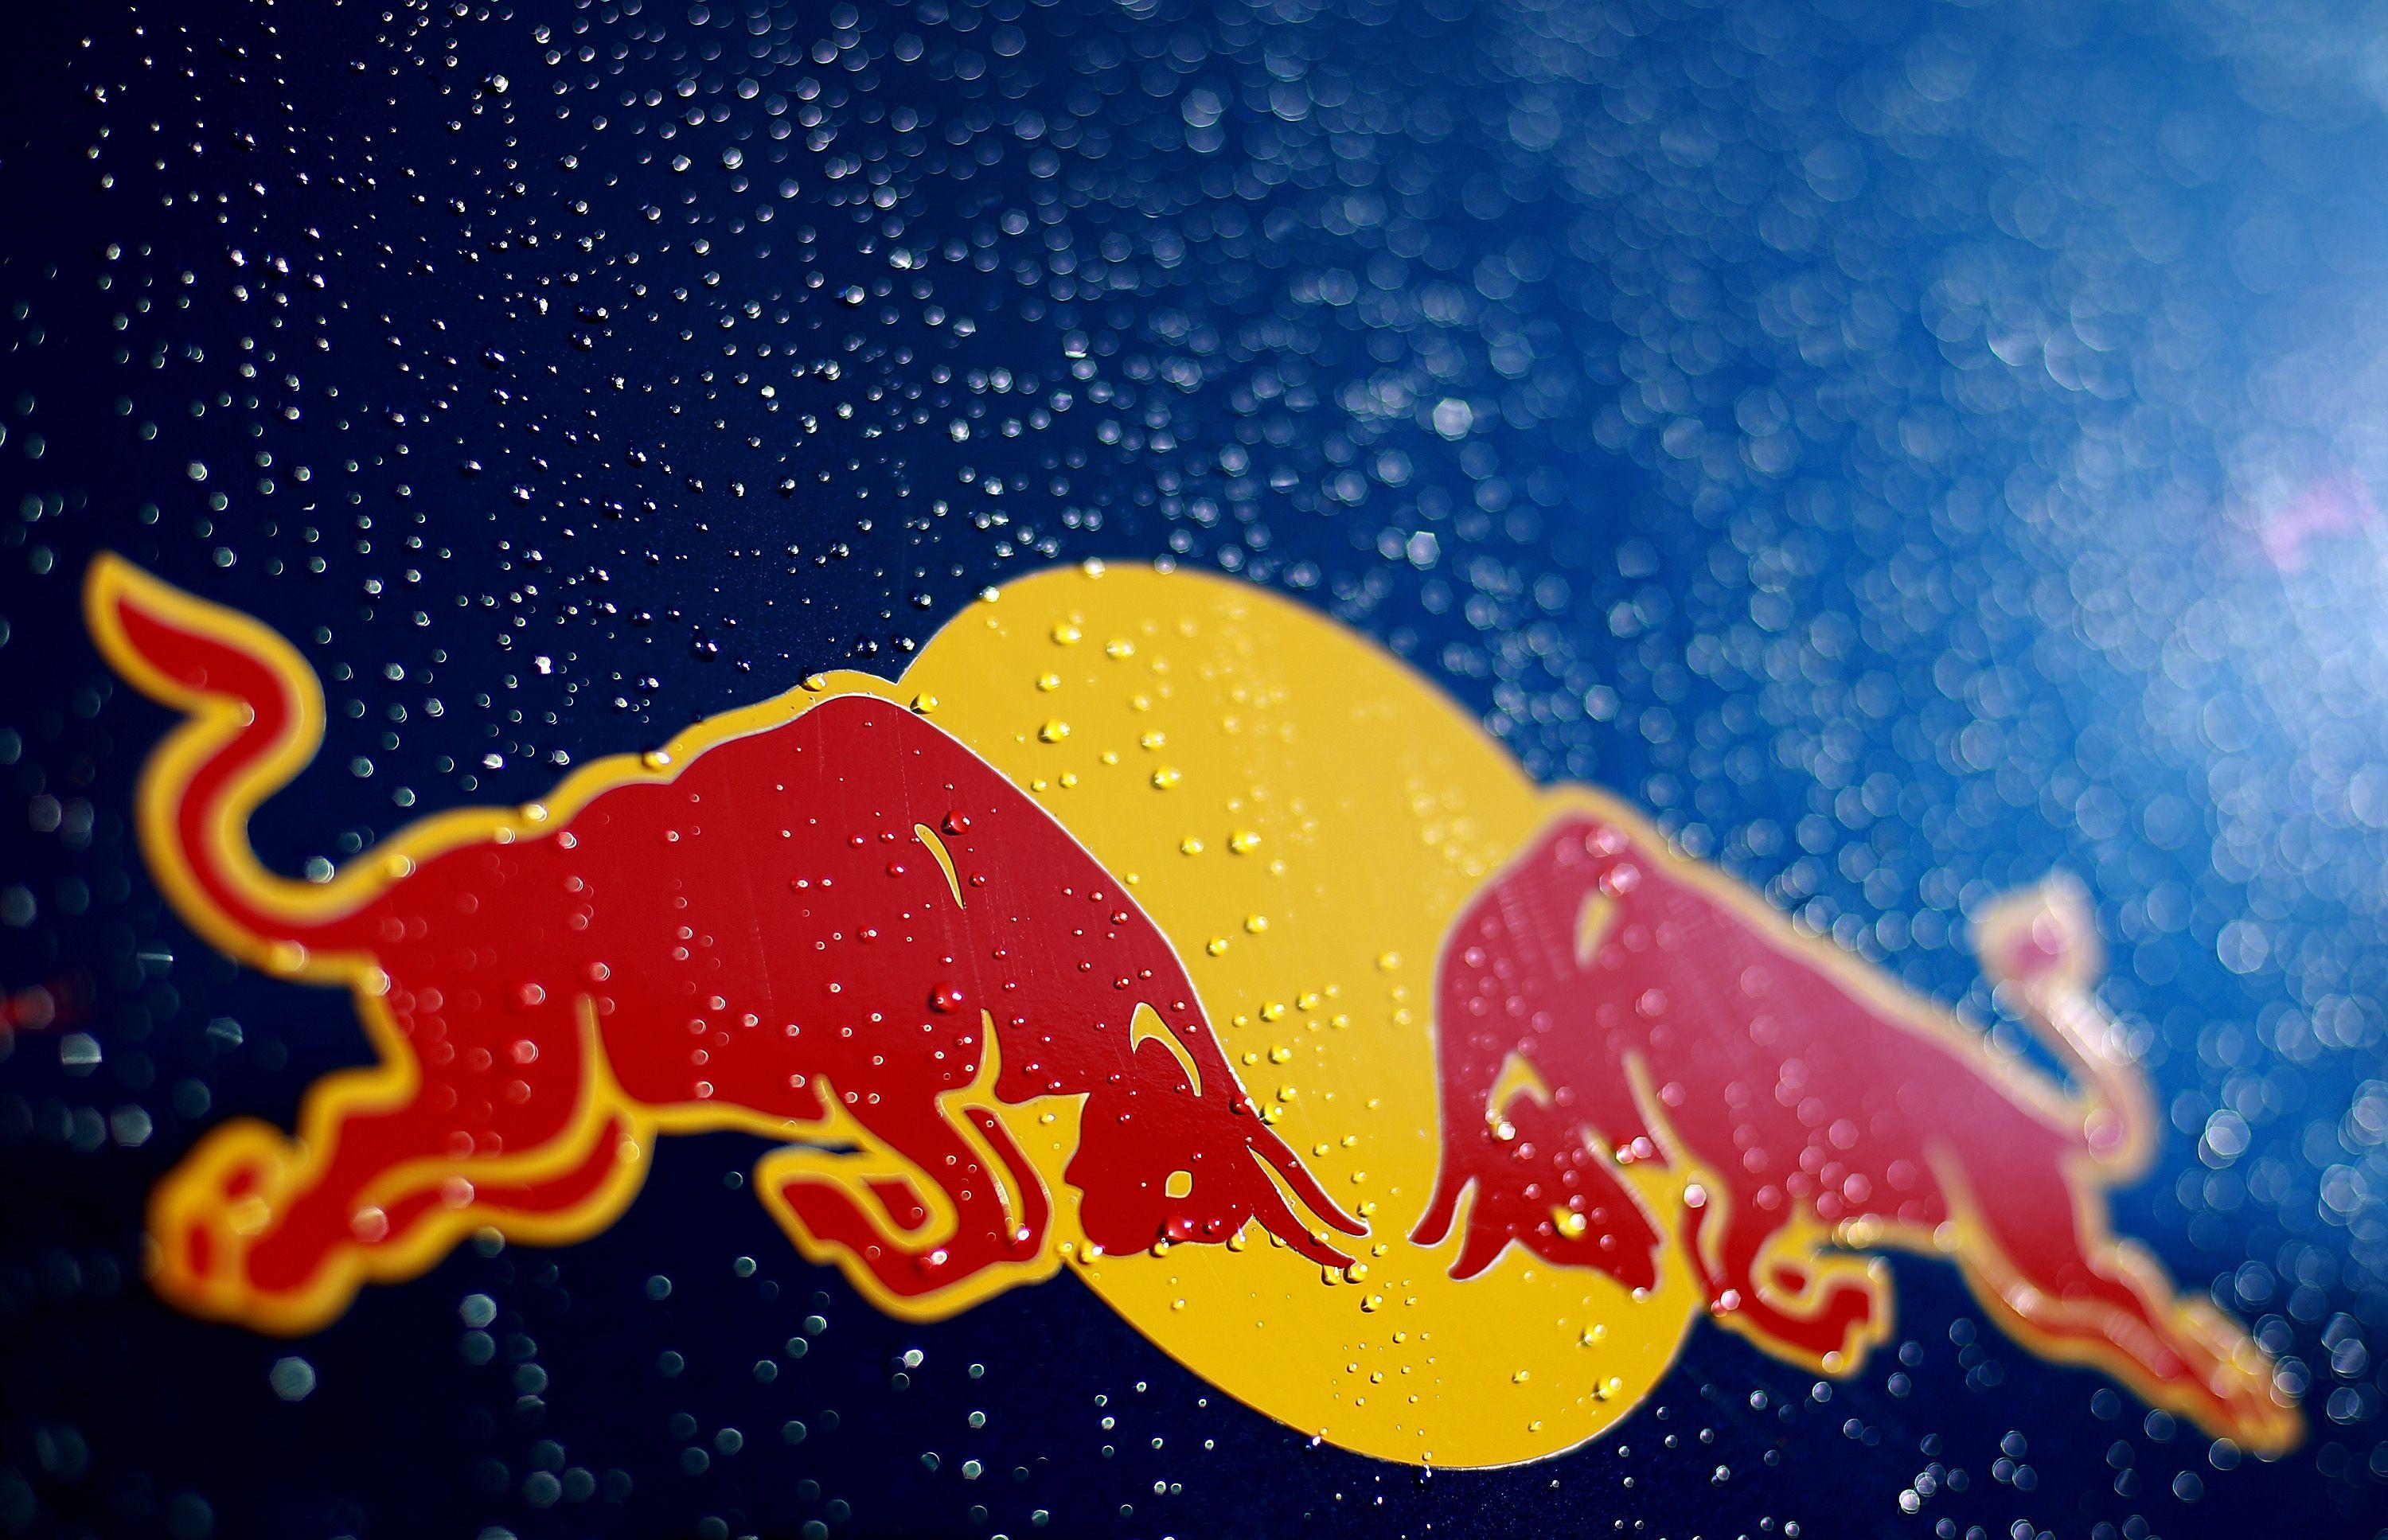 Red Bull Wallpaper HD Background, Image, Pics, Photo Free